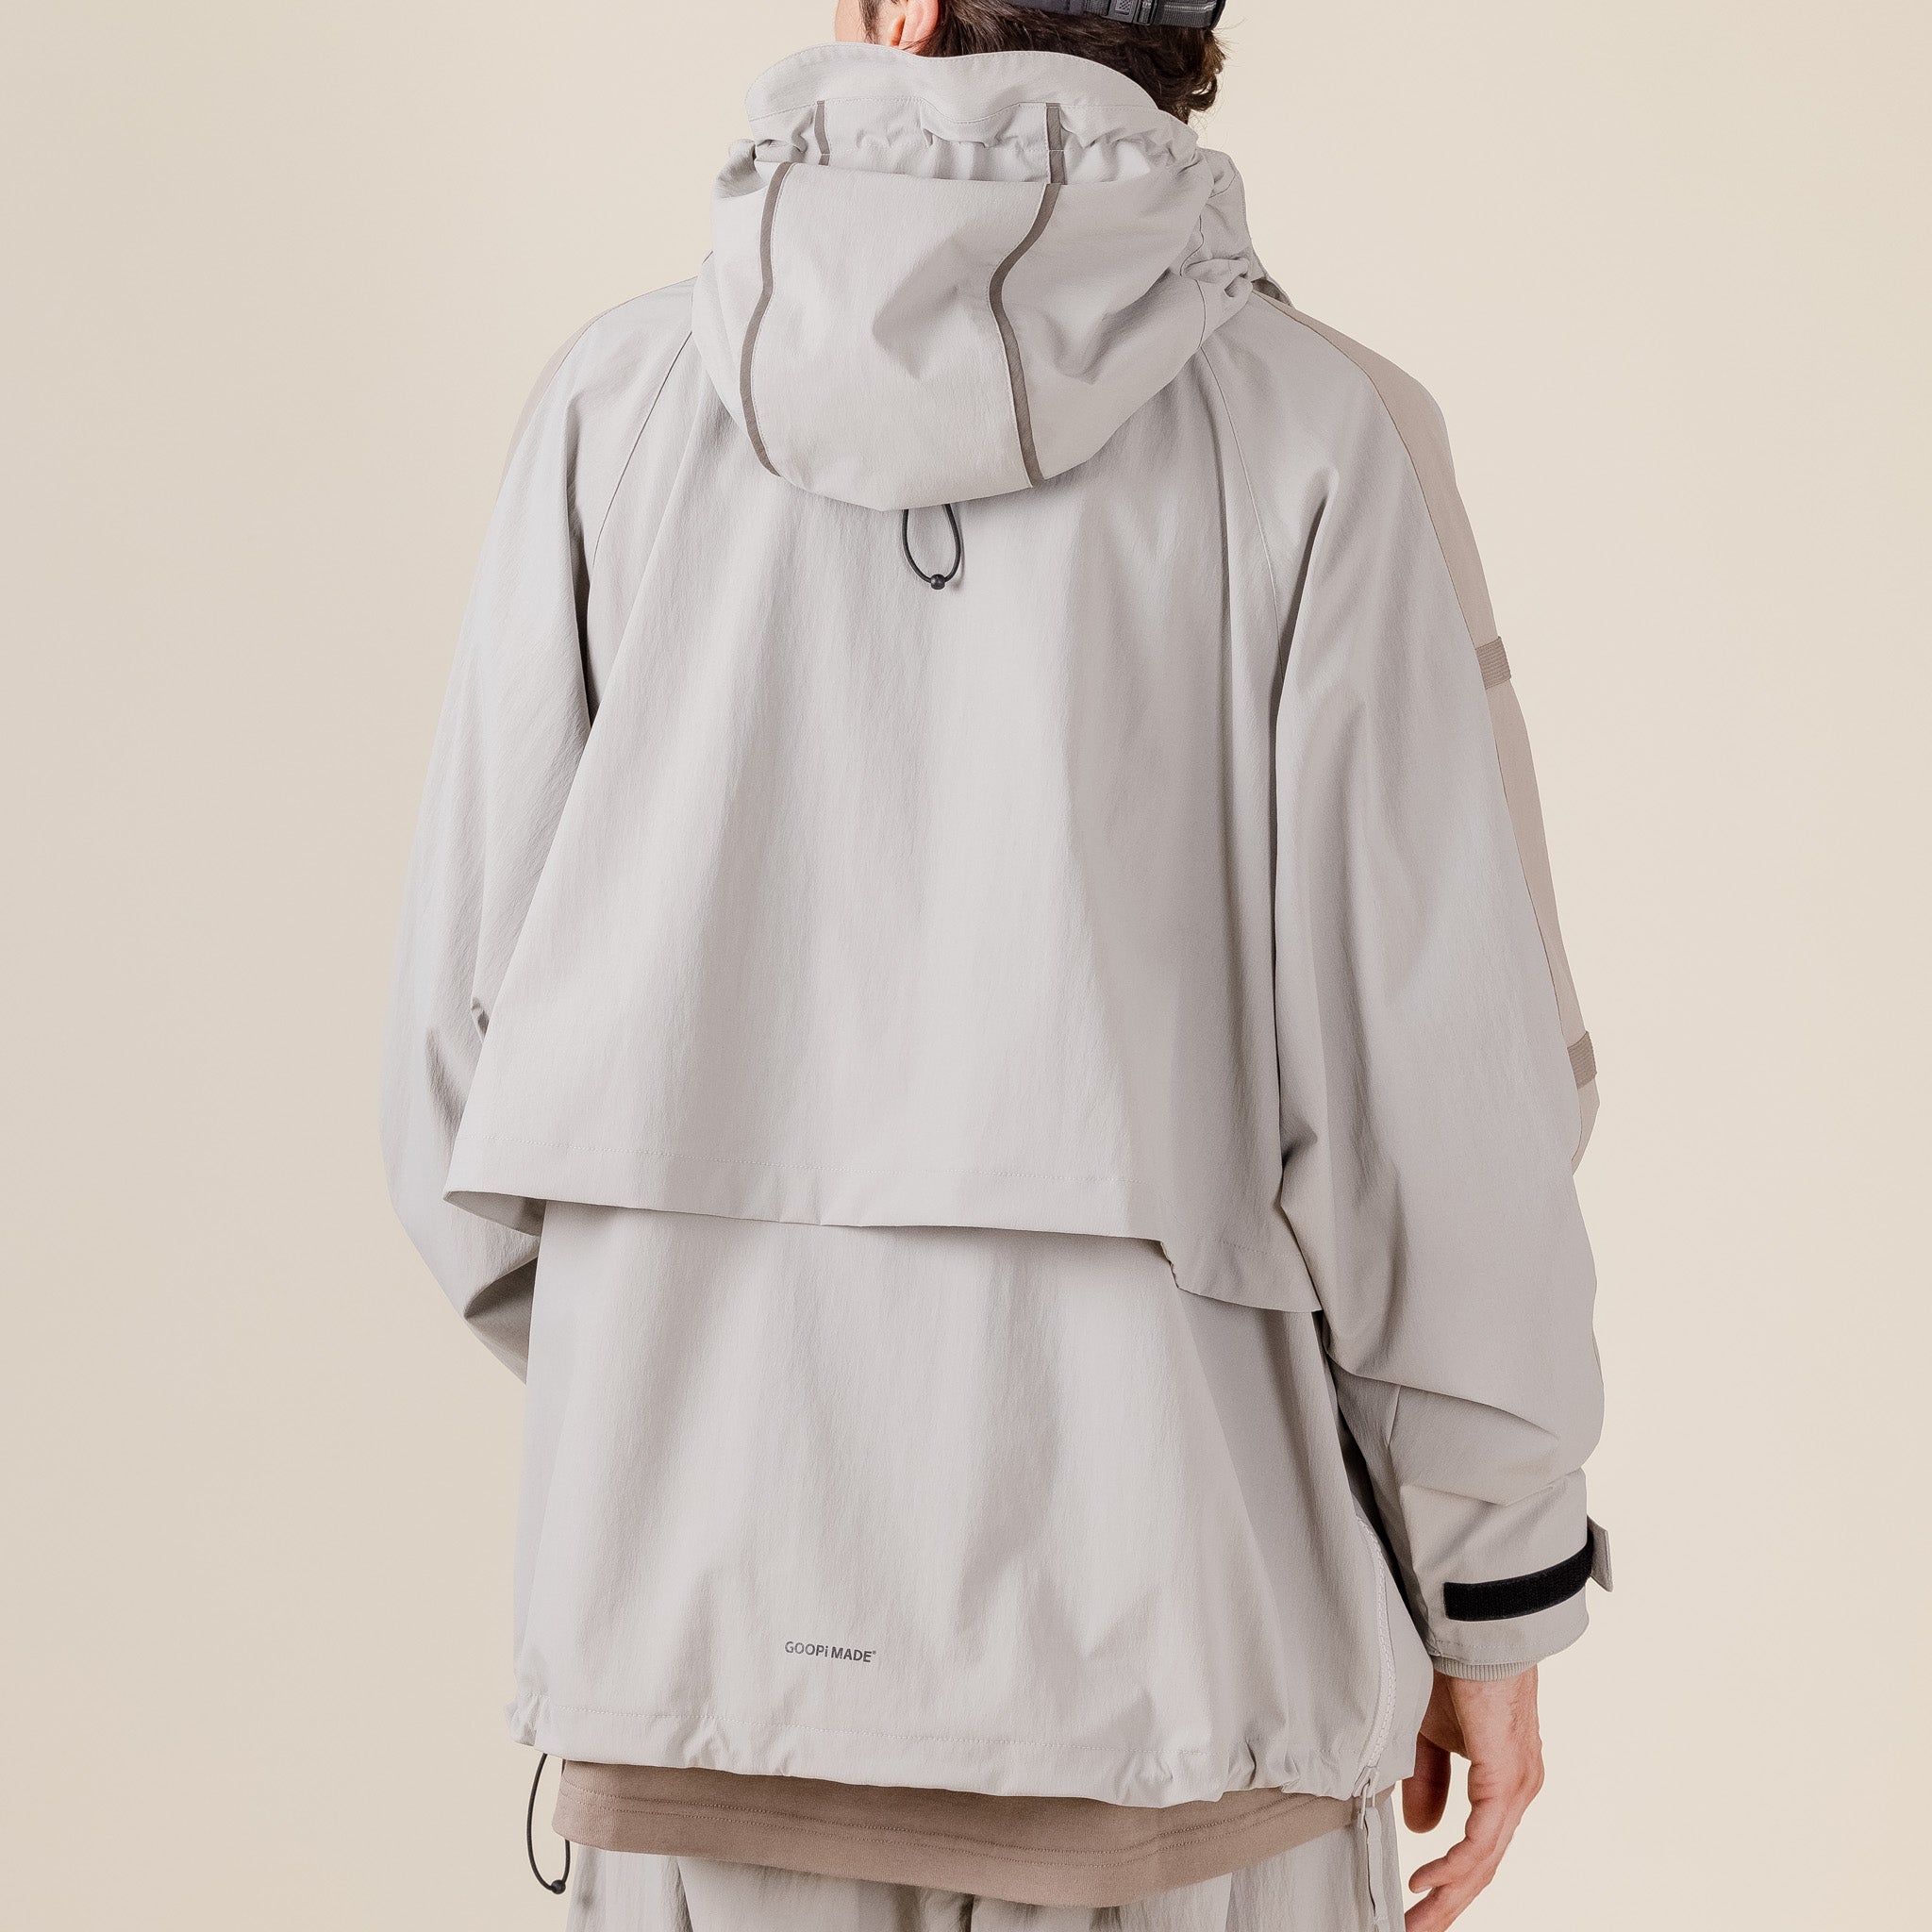 GOOPiMADE X TTOO - “Gof-A3” Tech-Meander Pullover Jacket - Light Grey "goopimade this thing of ours" "goopimade TTOO collaboration"